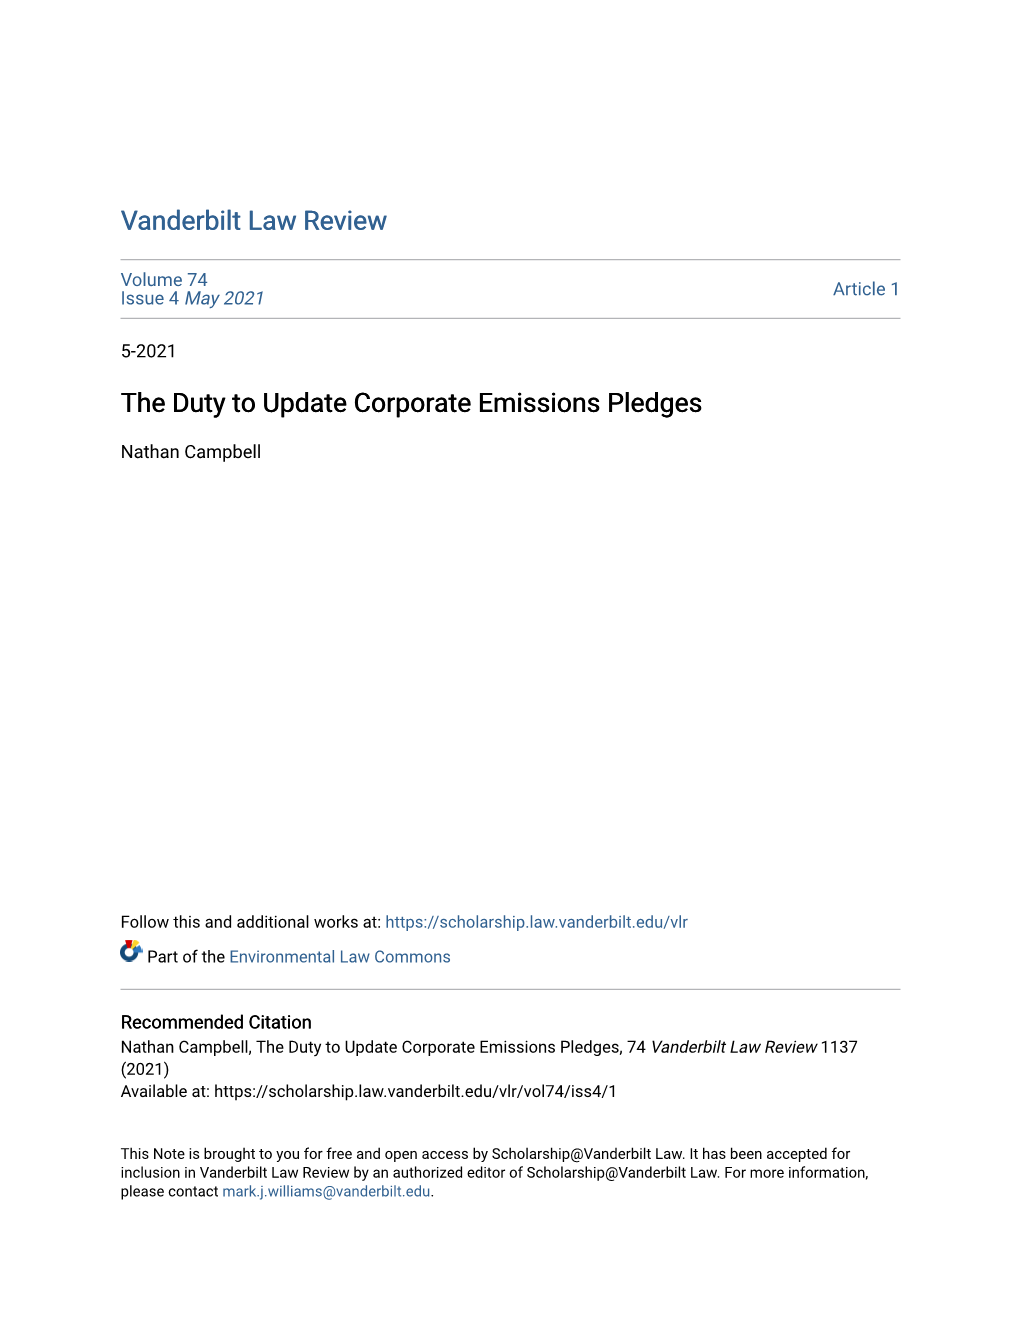 The Duty to Update Corporate Emissions Pledges